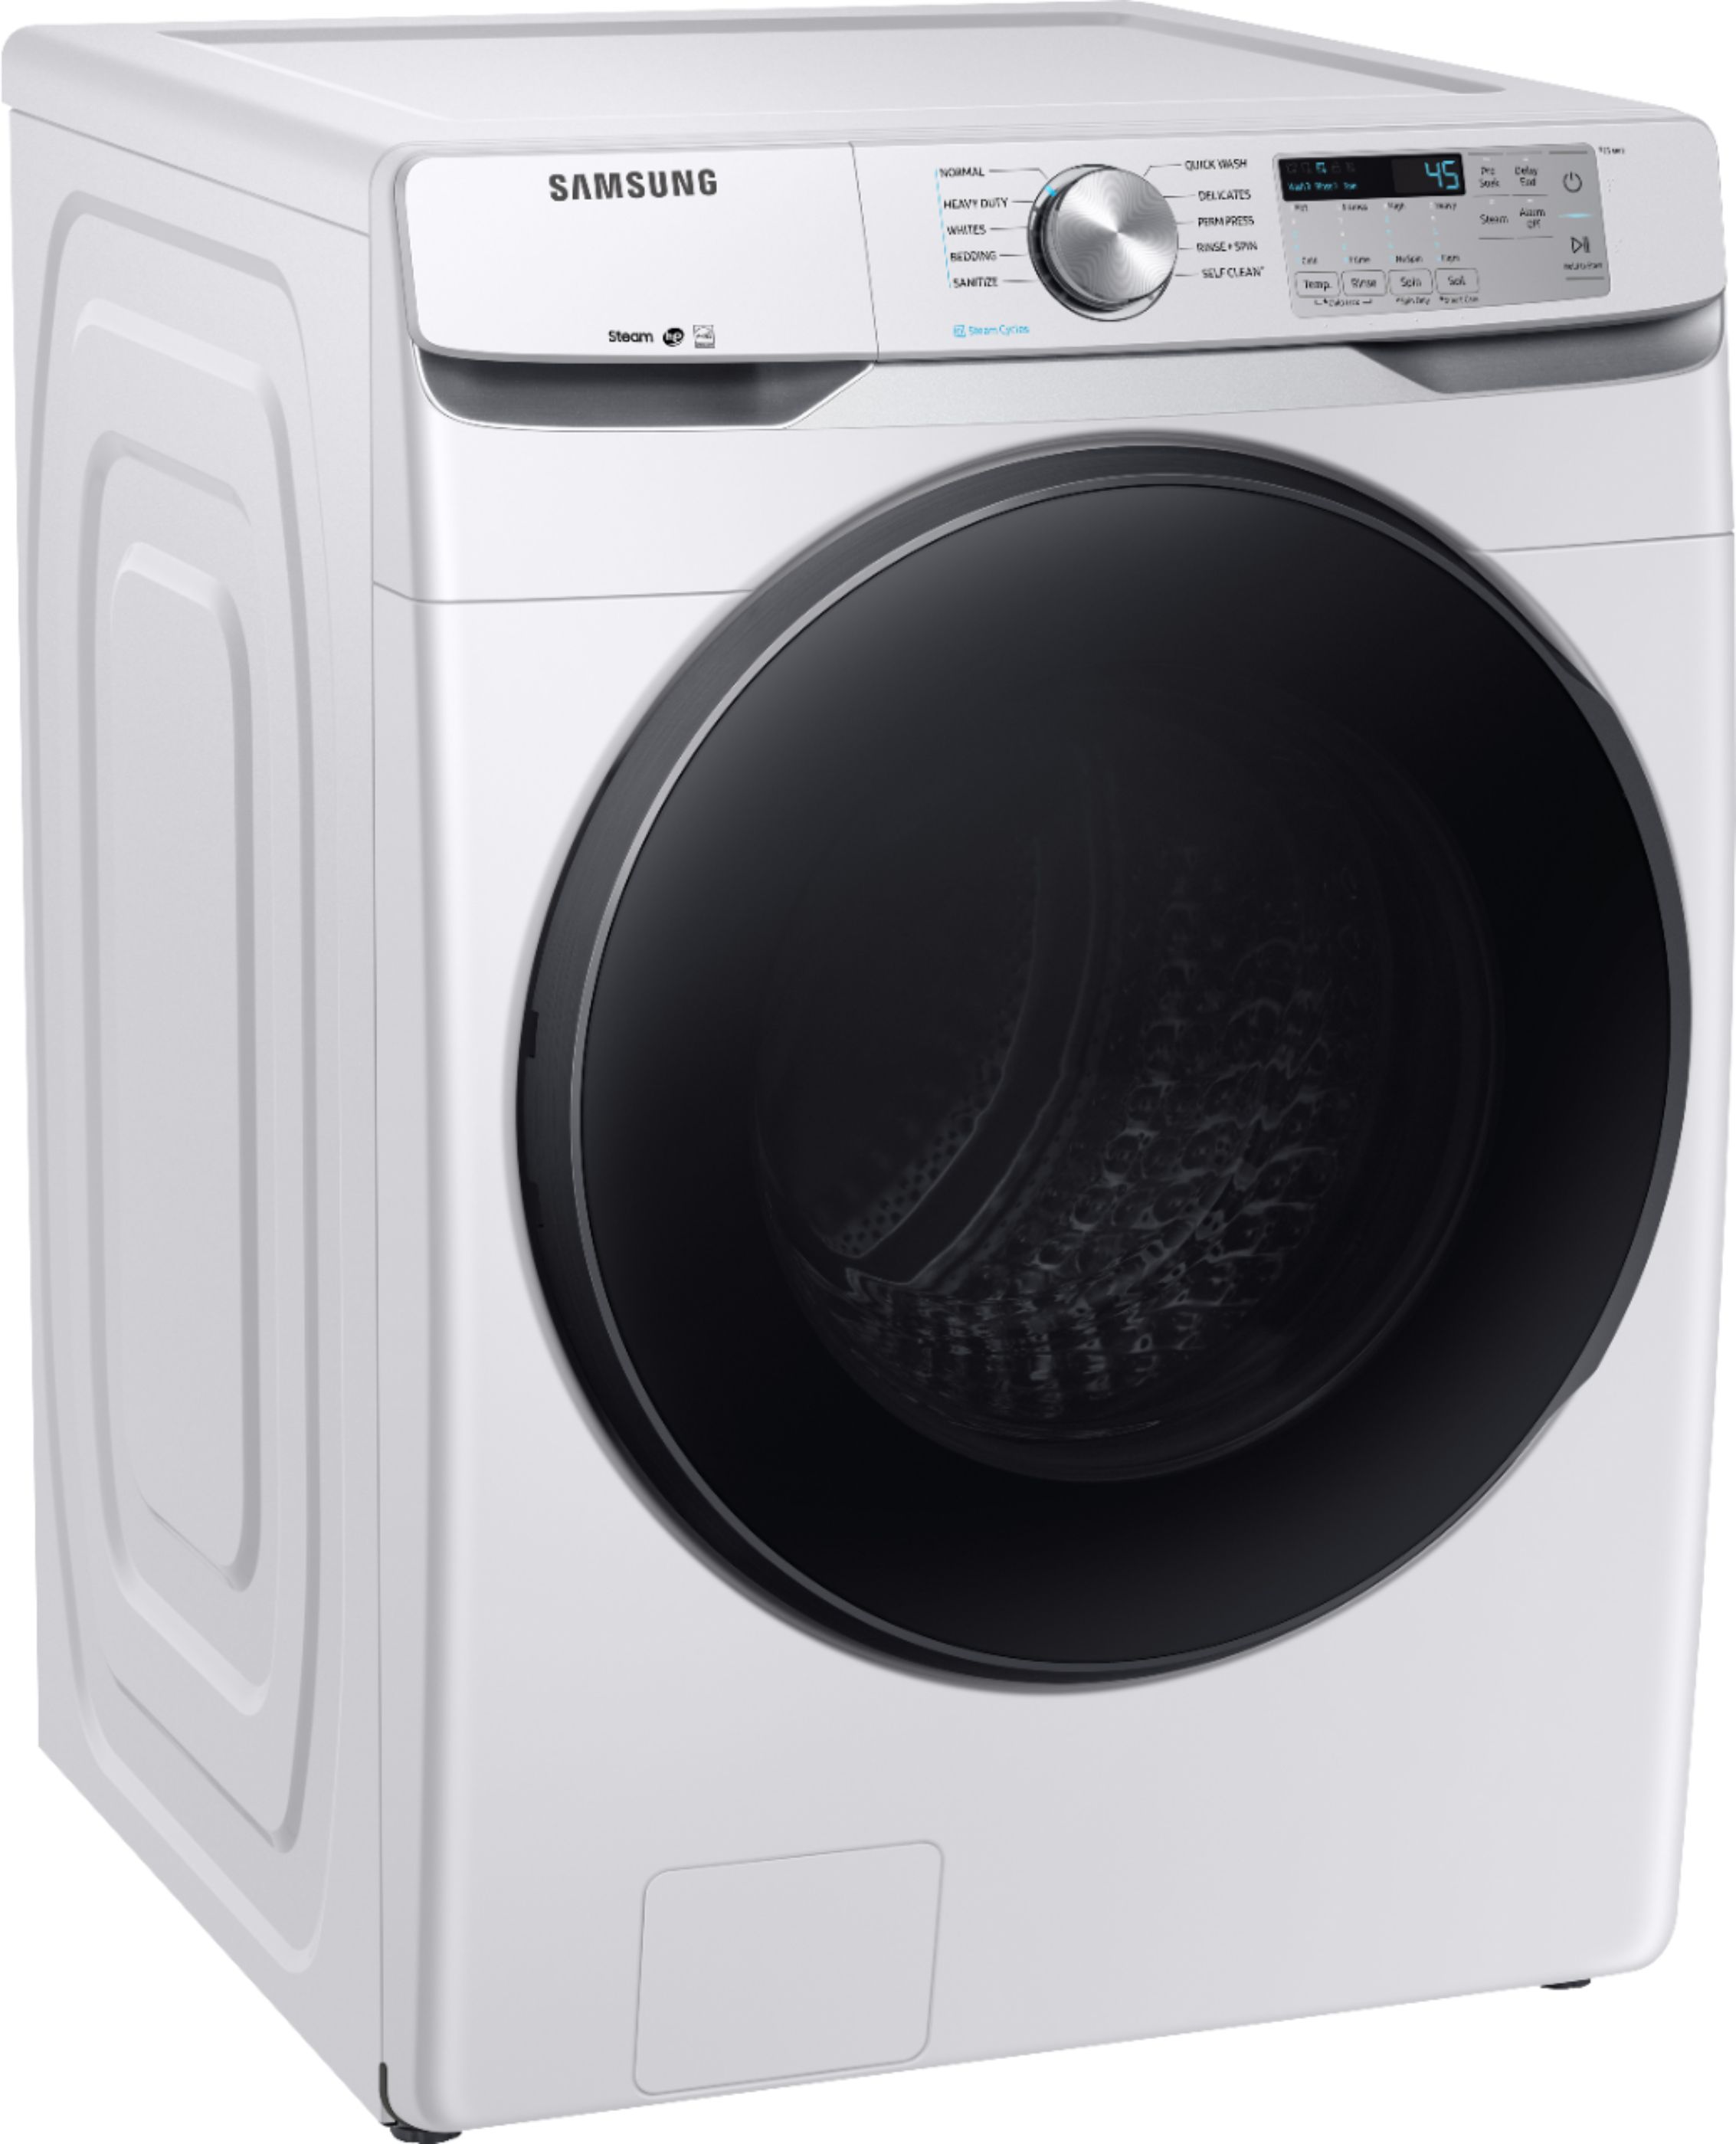 Angle View: Samsung - 4.5 Cu. Ft. High-Efficiency Stackable Front Load Washer with Steam and Self Clean+ - White